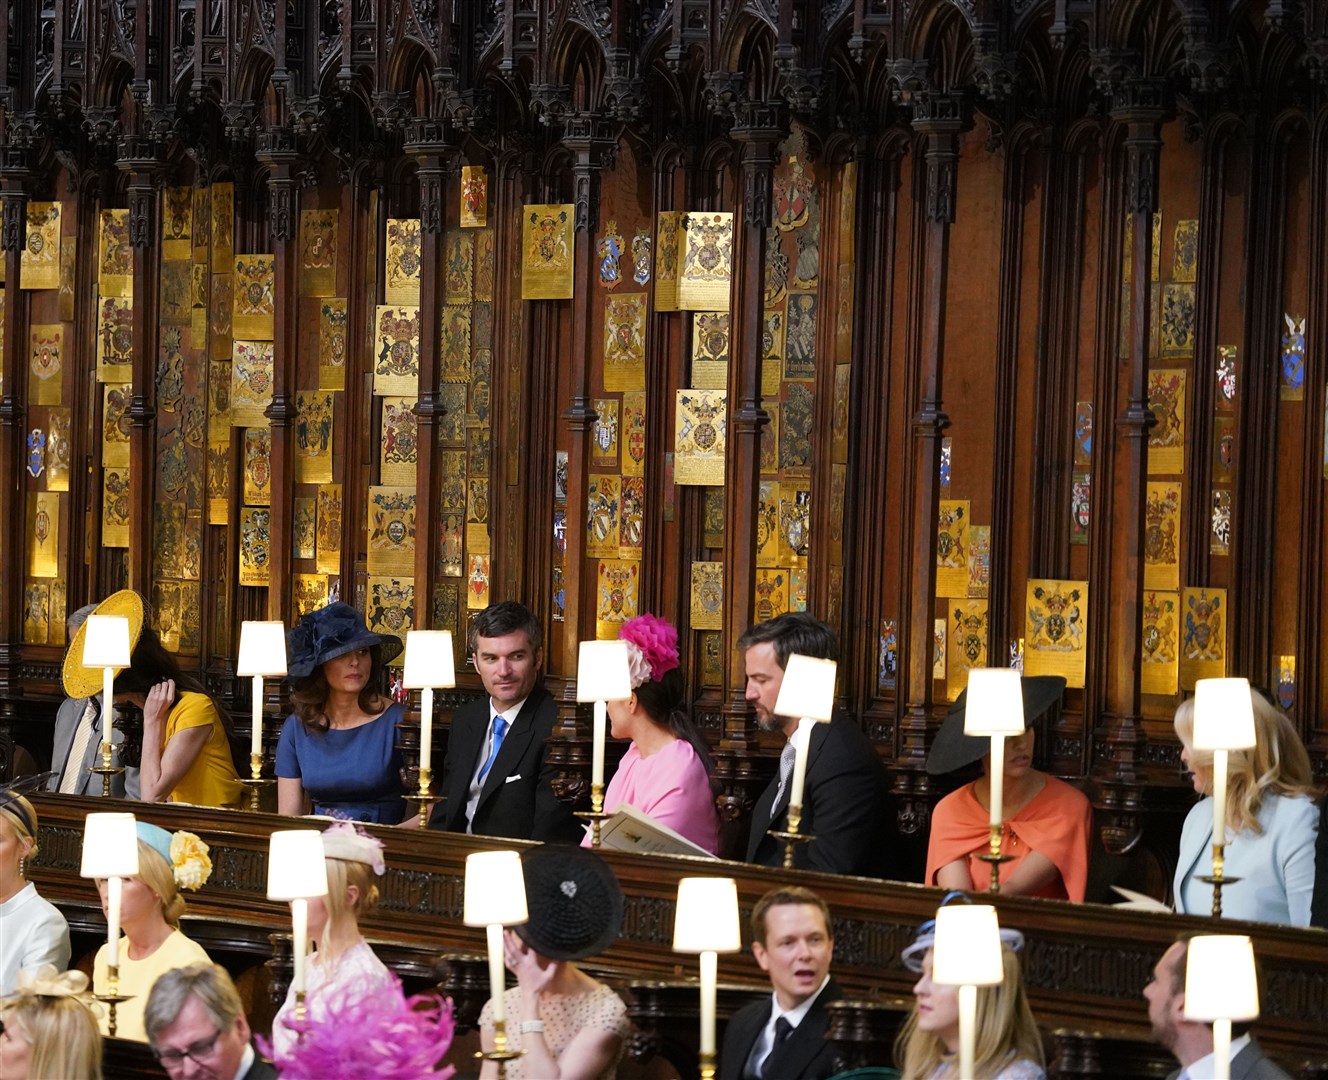 (Left to right, back row) George Clooney, Amal Clooney, Silver Tree, Abraham Levy, Celine Khavarani, Markus Anderson, Janina Gavankar, and Jill Smoller in St George’s Chapel for Harry and Meghan’s wedding (Dominic Lipinski/PA)